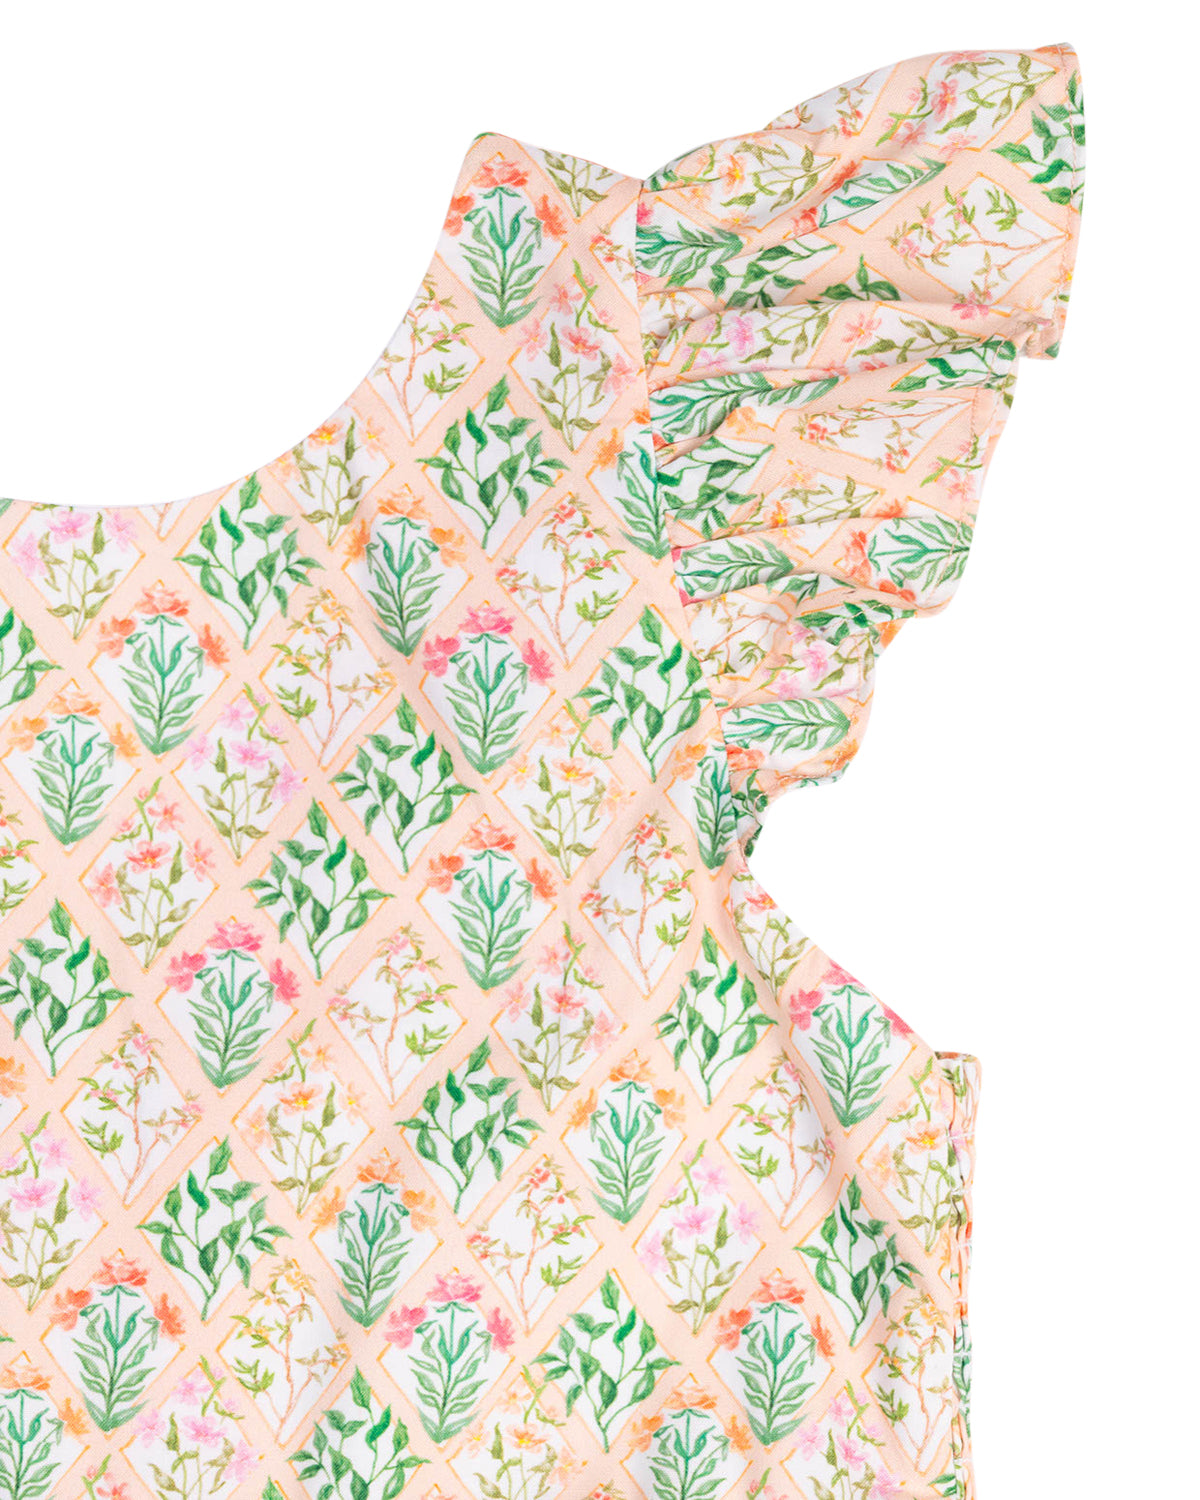 Peachy Florals Bow Back Dress